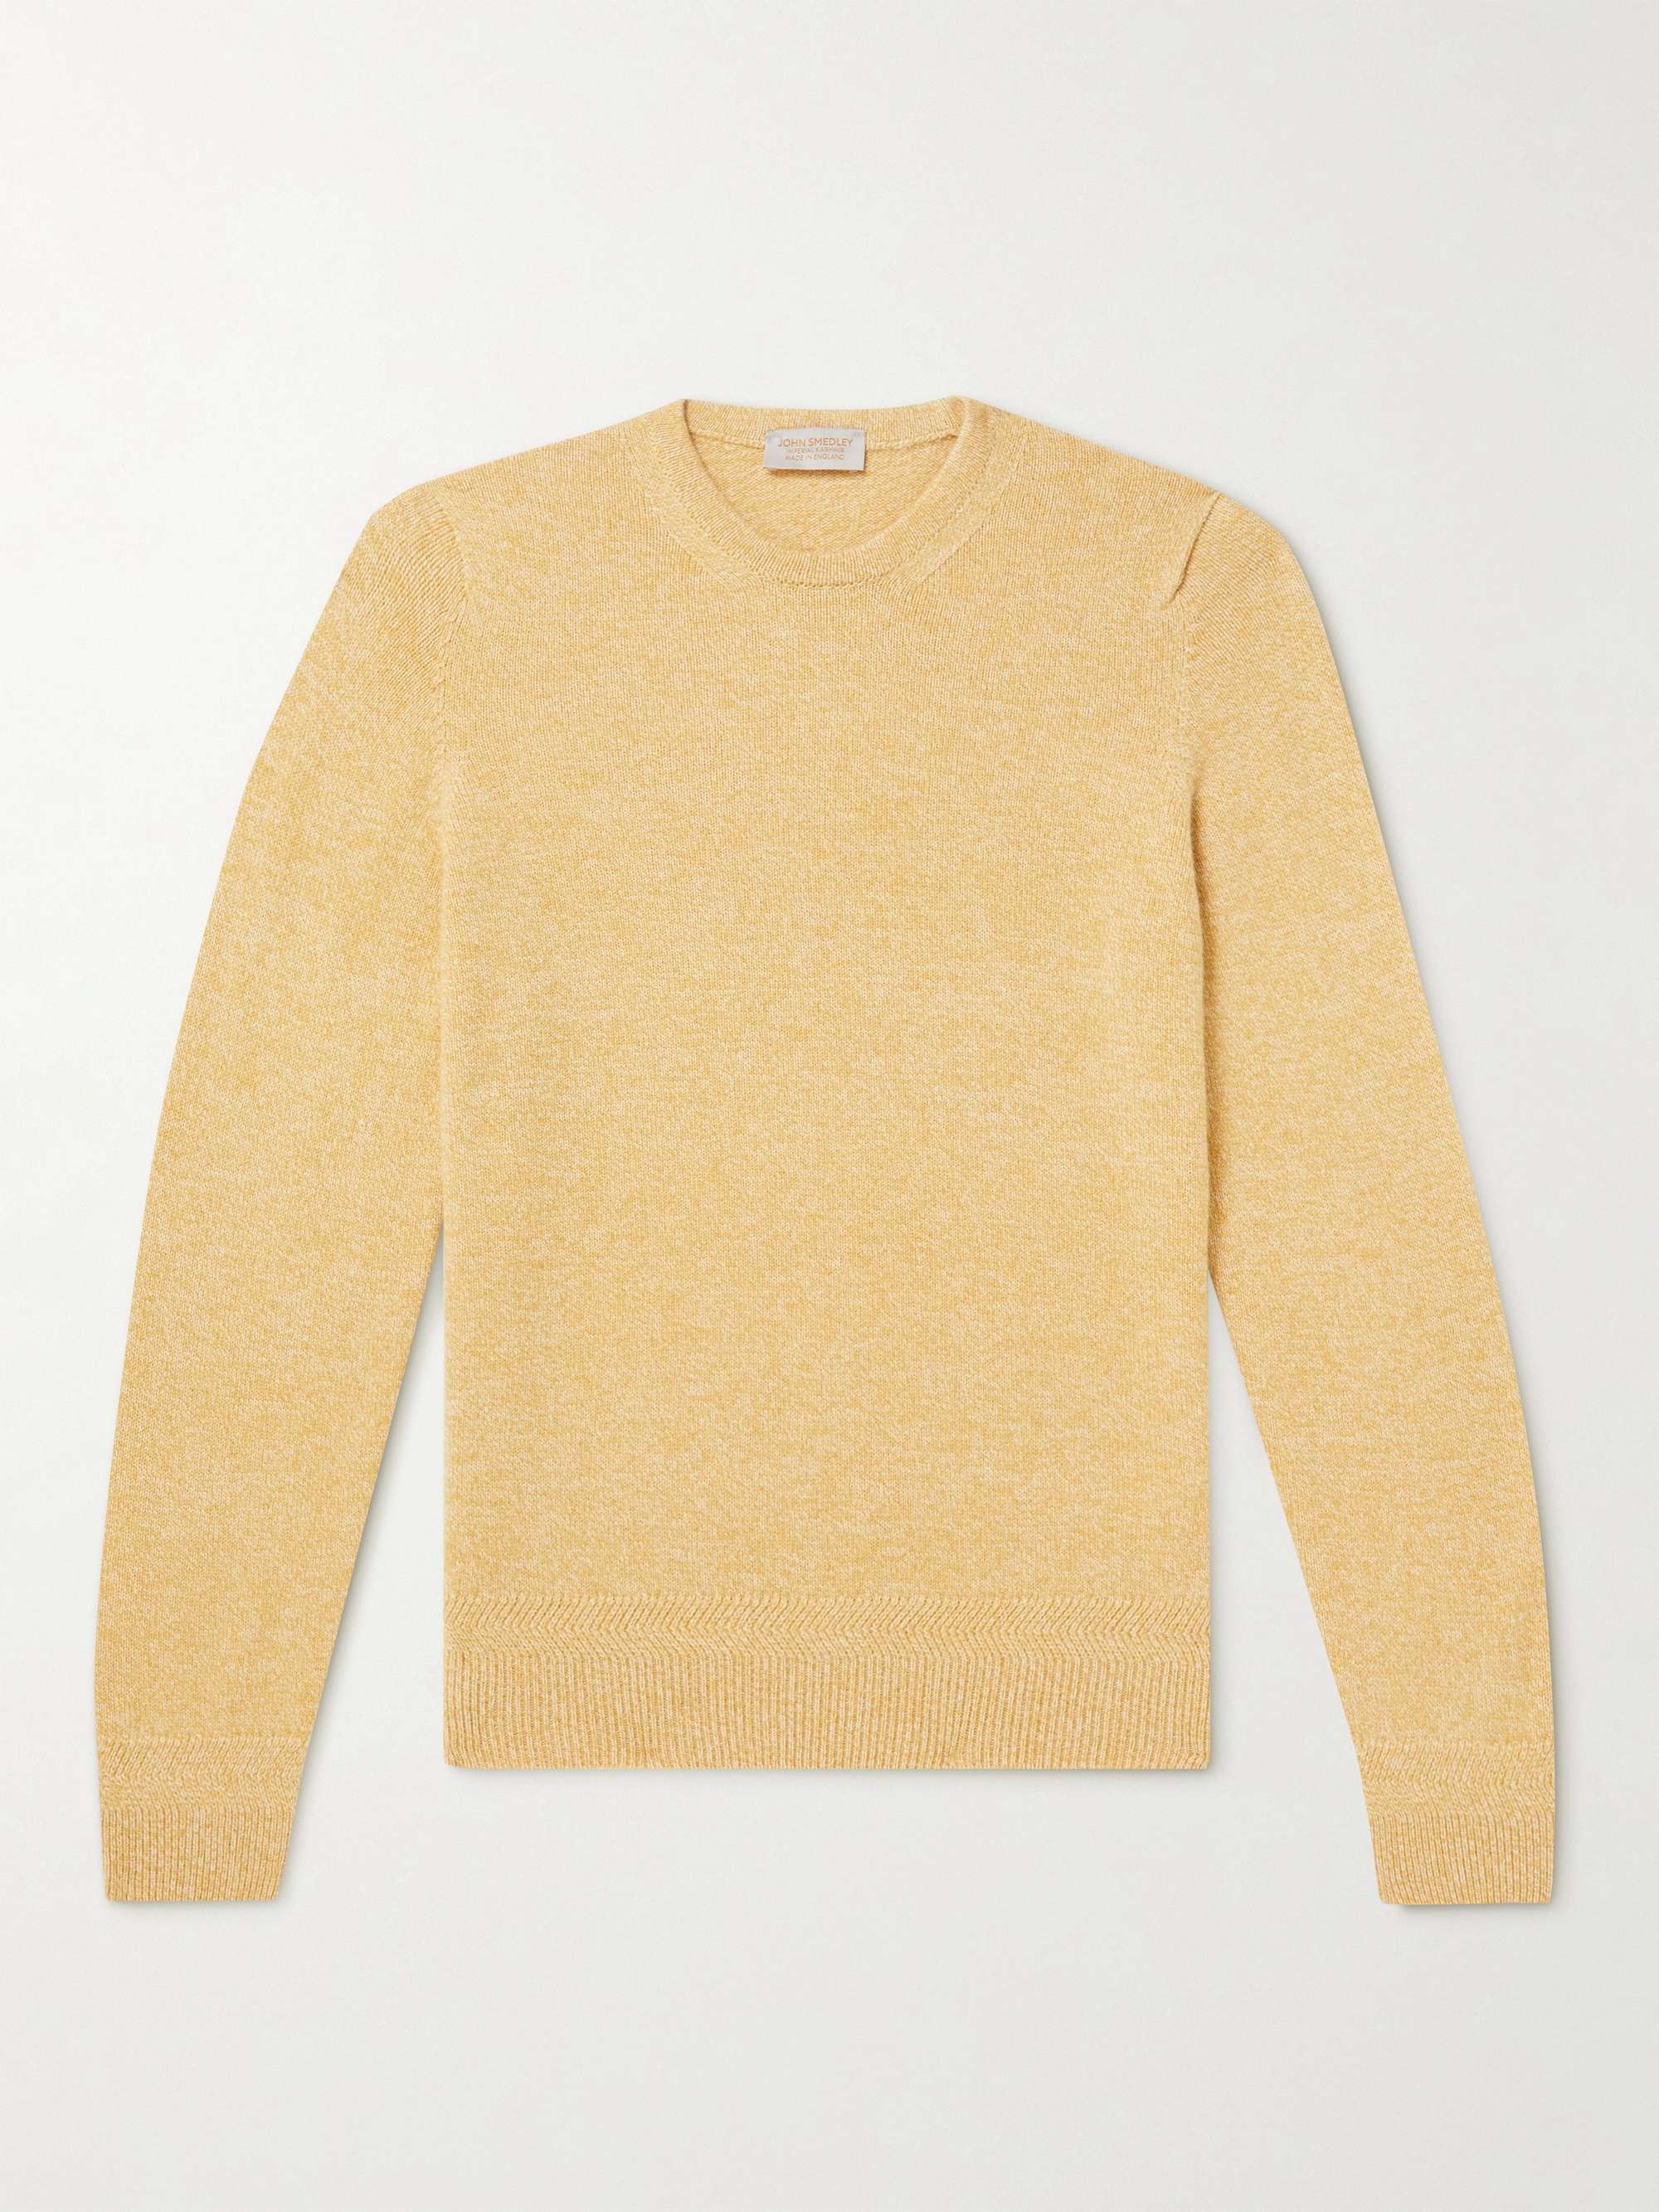 JOHN SMEDLEY Niko Slim-Fit Recycled Cashmere and Merino Wool-Blend Sweater